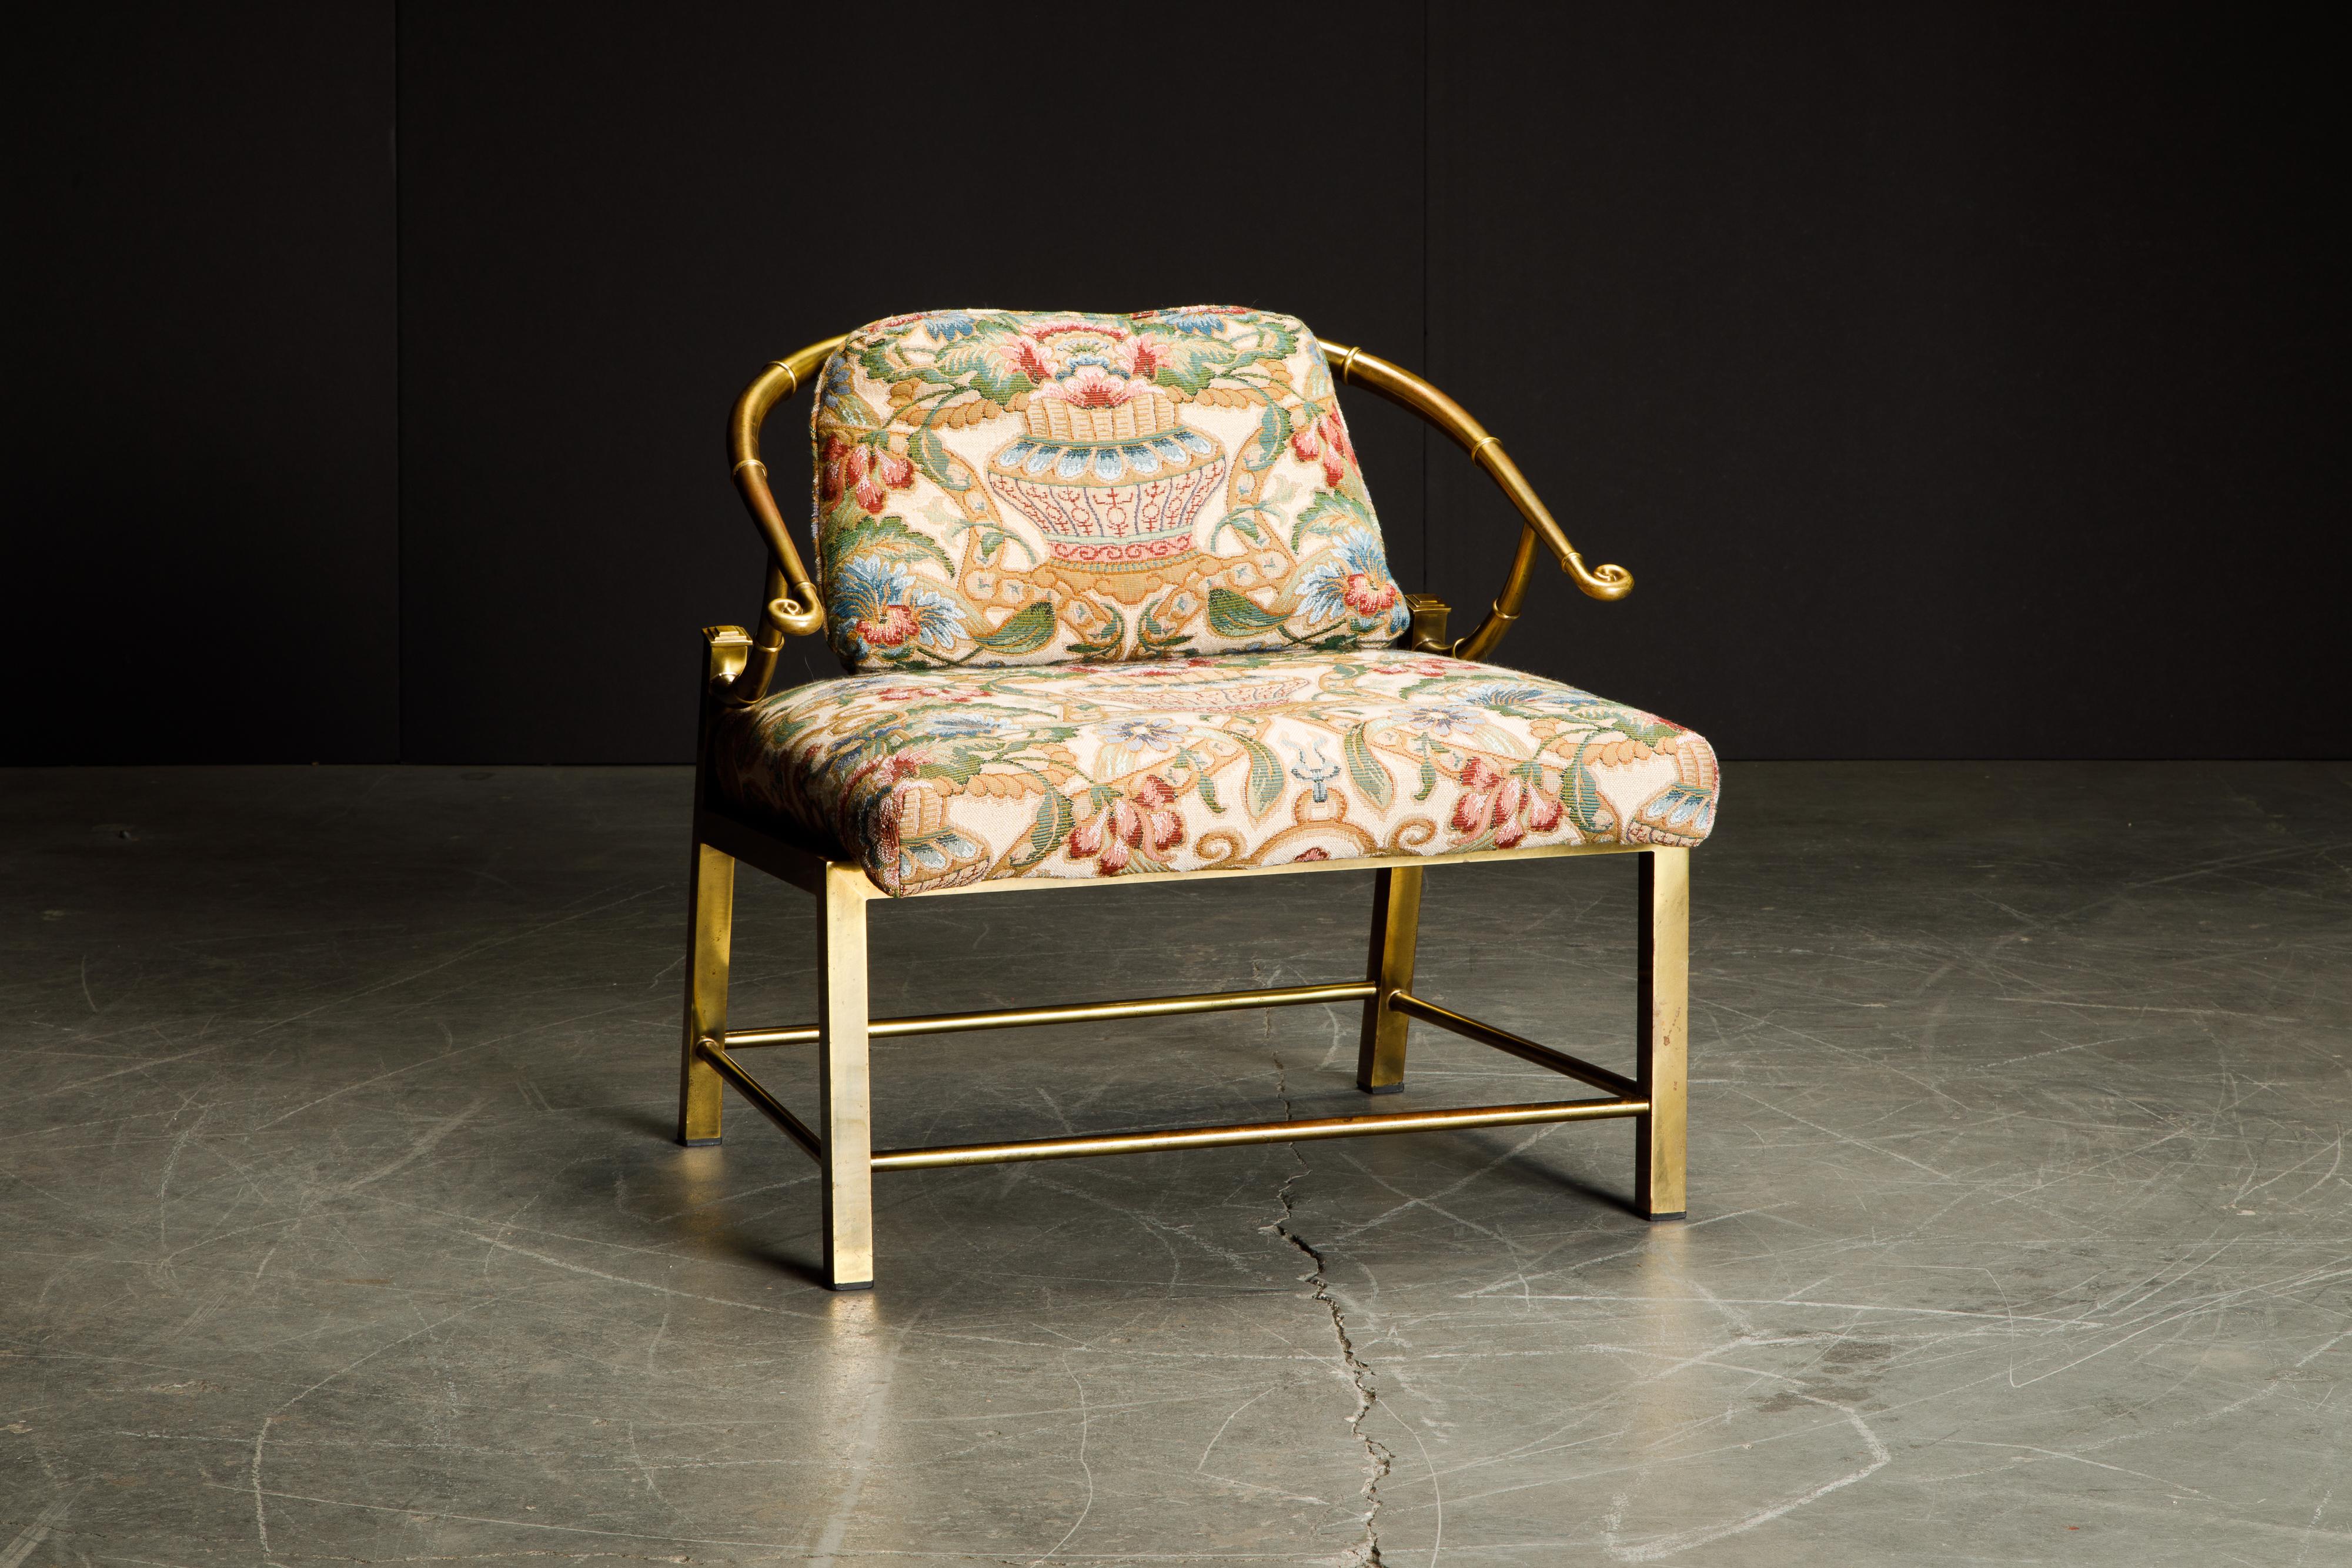 This beautiful lightly patinated brass slipper chair by Mastercraft is signed underneath with Made in Italy label. This gorgeous empress chair by Mastercraft shares design cues with James Mont with its asian influences, designed by Charles Pengally